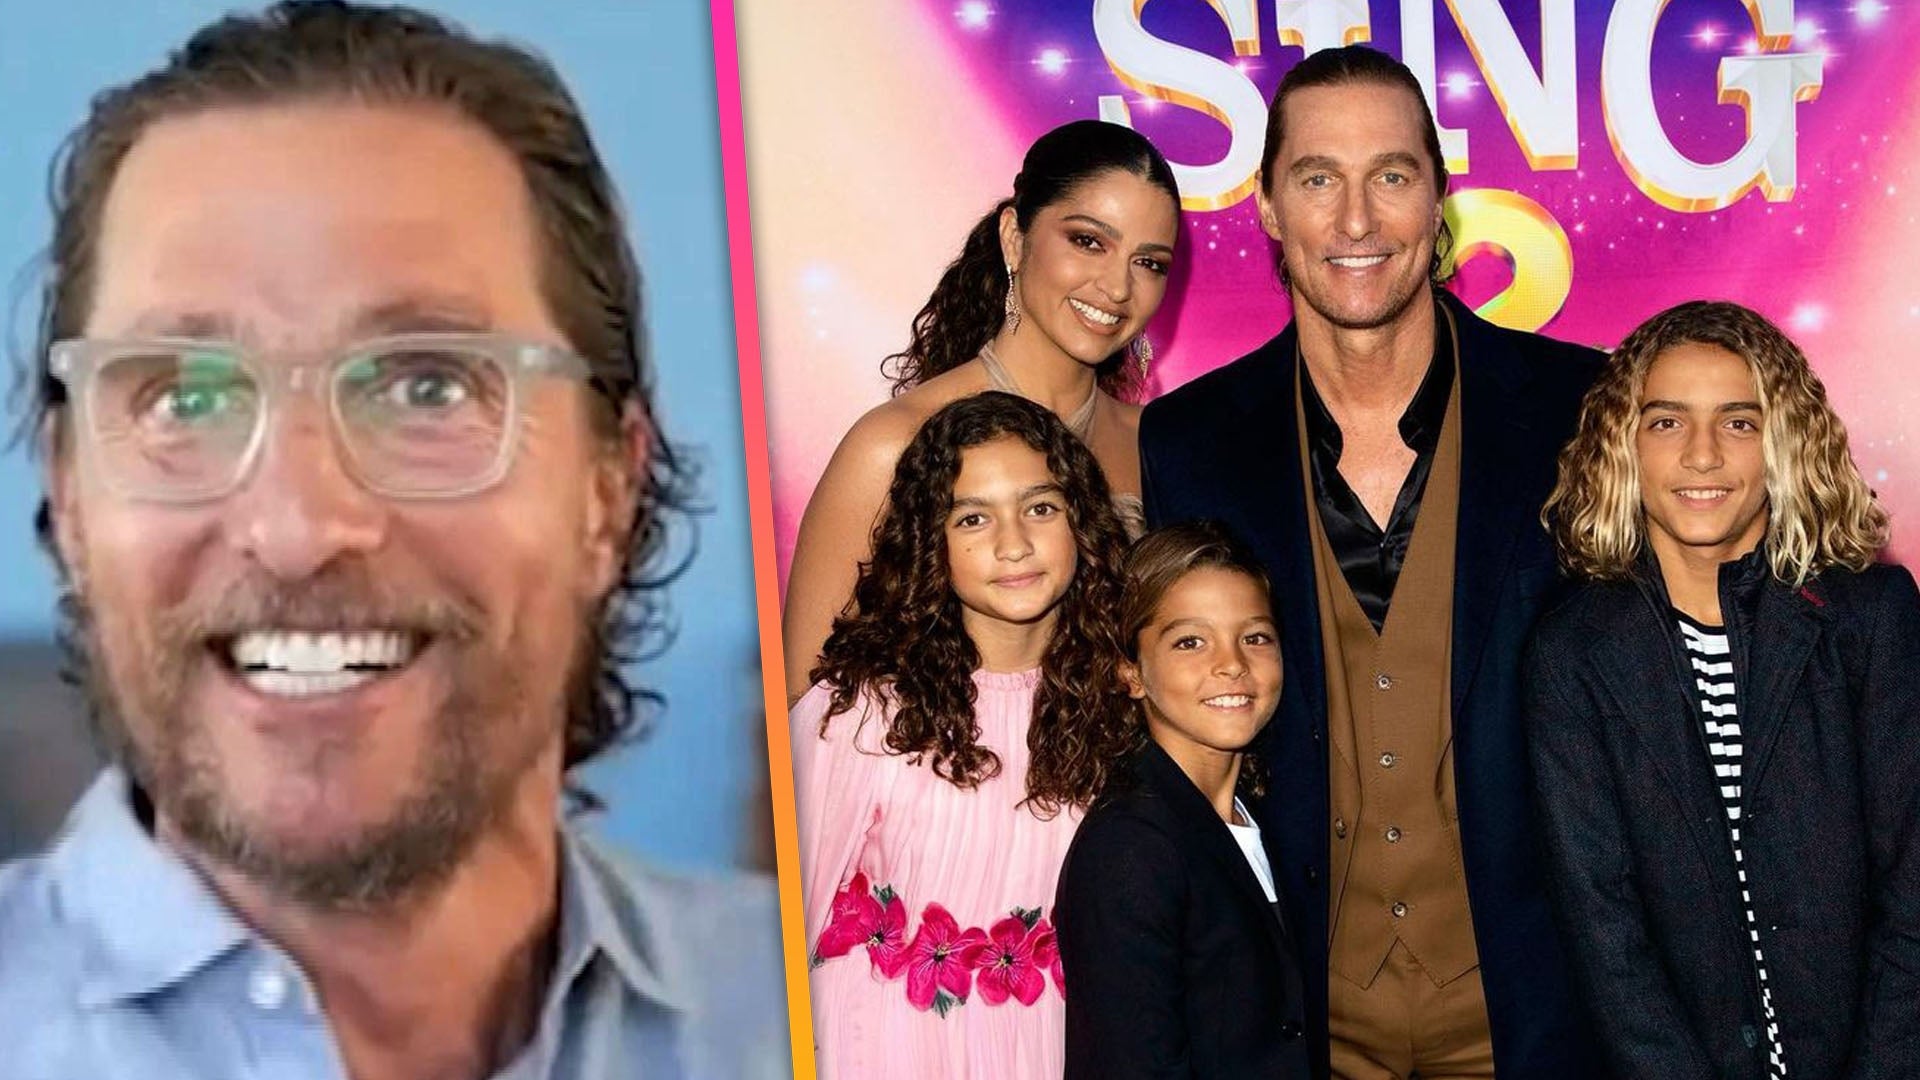 Matthew McConaughey on His Relationship With His Kids and How It's Changing